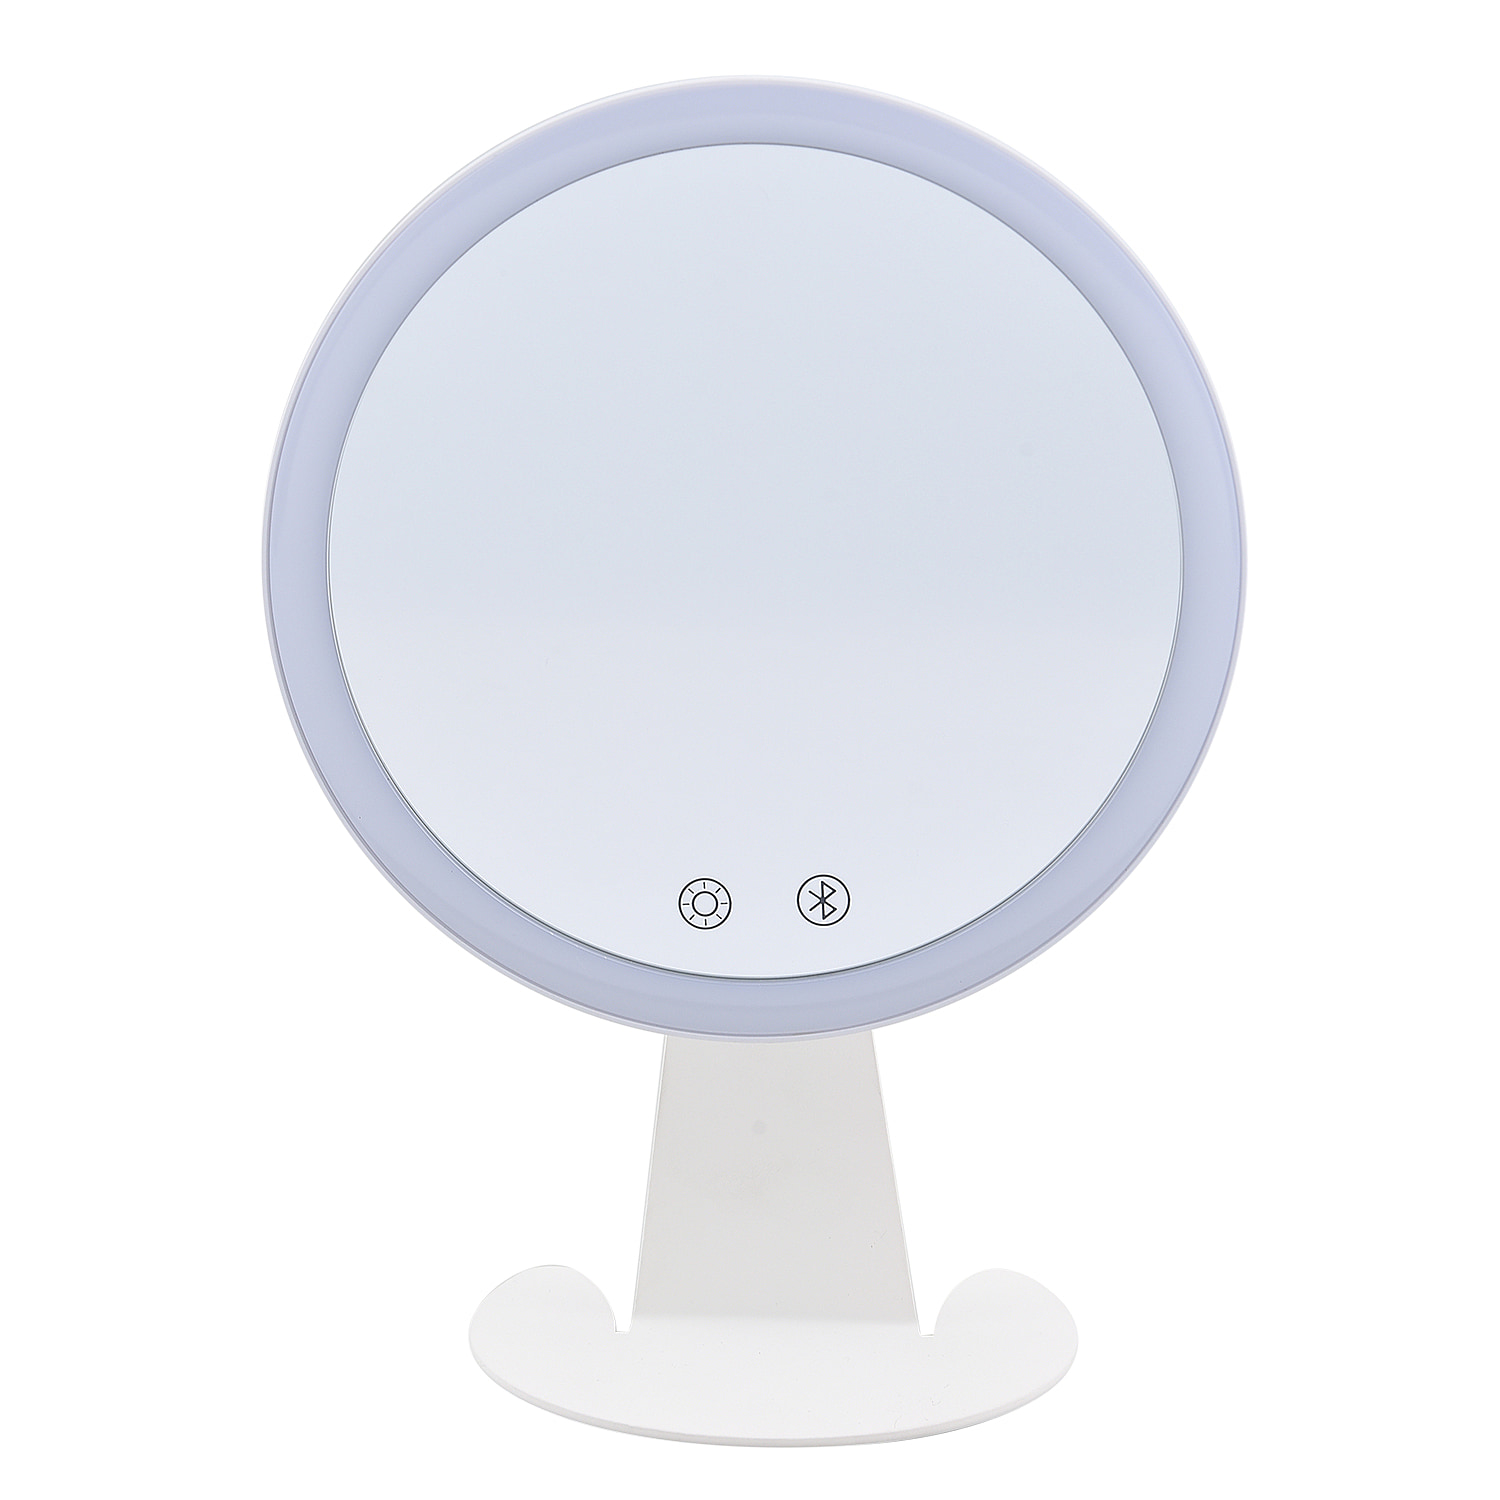 LED-Makeup-Mirror-with-Bluetooth-Audio-and-Powered-by-USB-Cable--White